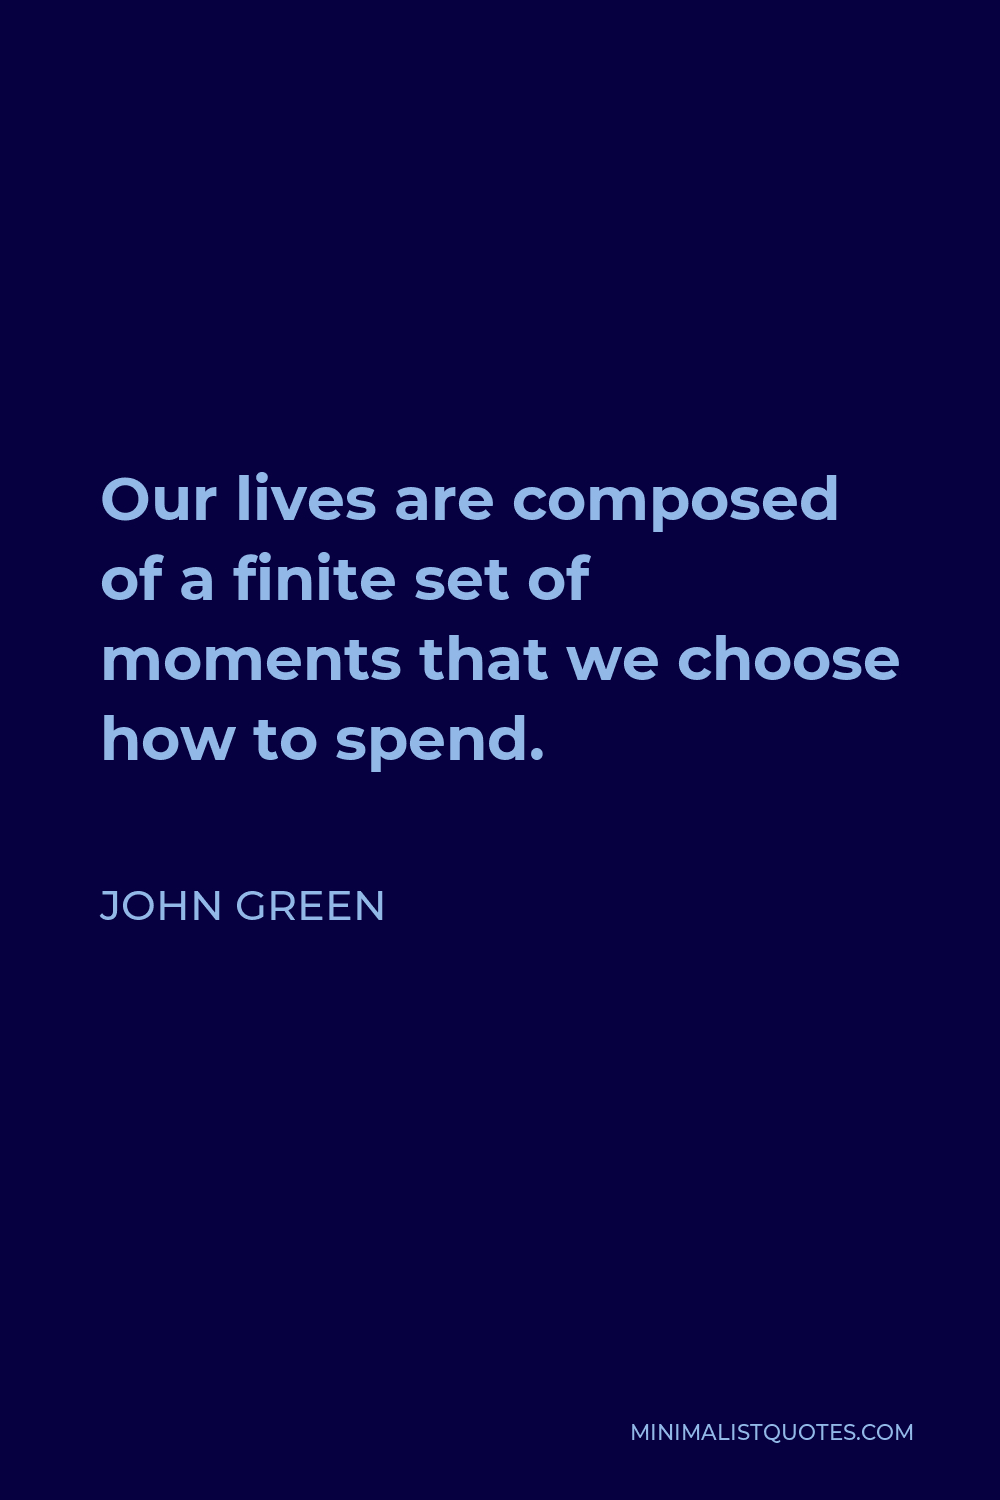 John Green Quote - Our lives are composed of a finite set of moments that we choose how to spend.